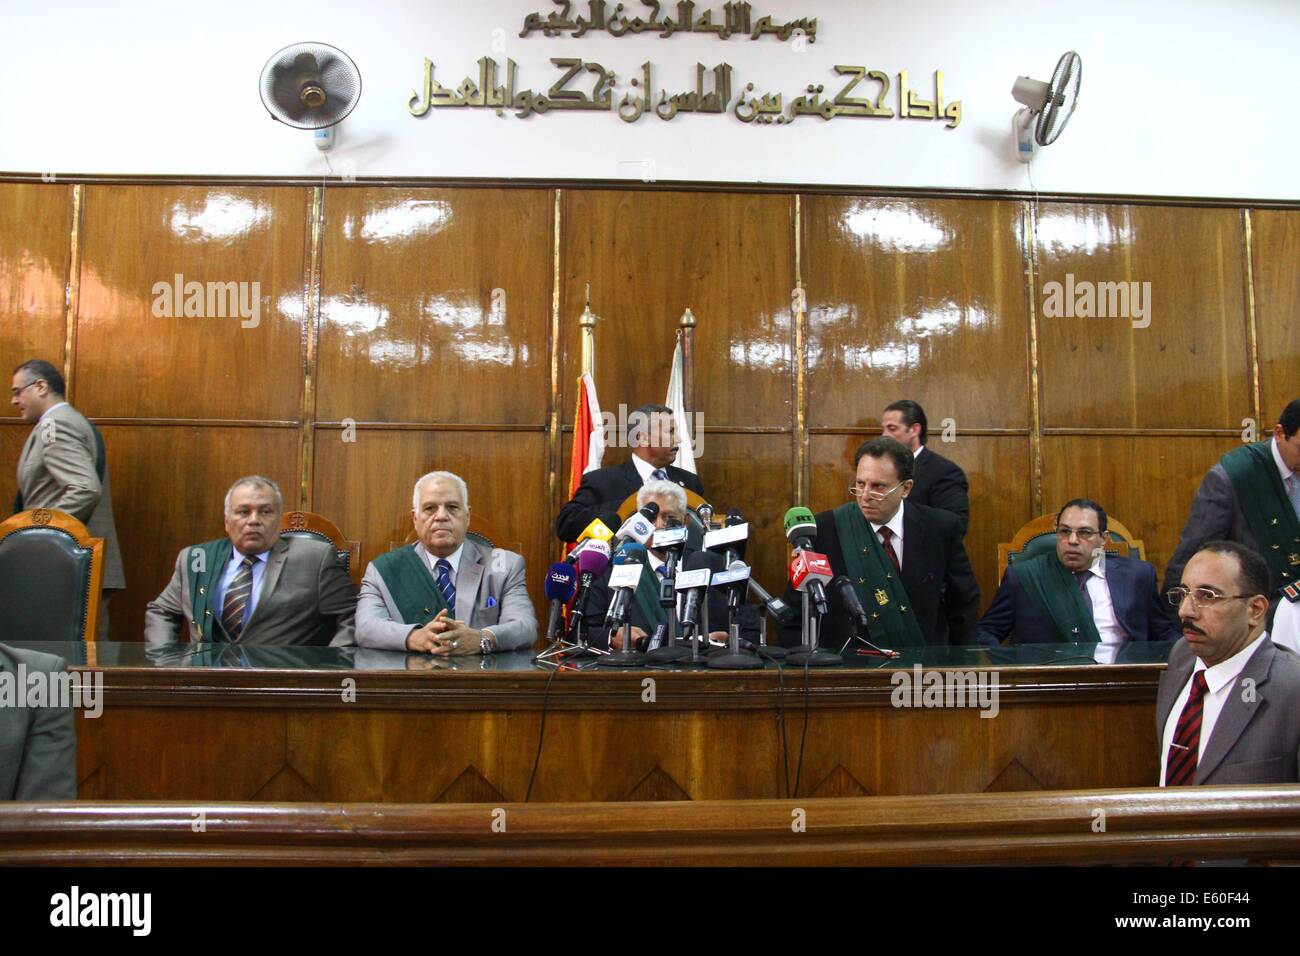 Cairo, Egypt. 9th Aug, 2014. A press conference is about to be held at an Egyptian court in Cairo, Egypt, on Aug. 9, 2014. An Egyptian court ruled on Saturday to dissolve the Freedom and Justice Party (FJP), the Muslim Brotherhood's political wing, and to liquidate all its assets, according to the state-run Ahram online. © Ahmed Gomaa/Xinhua/Alamy Live News Stock Photo